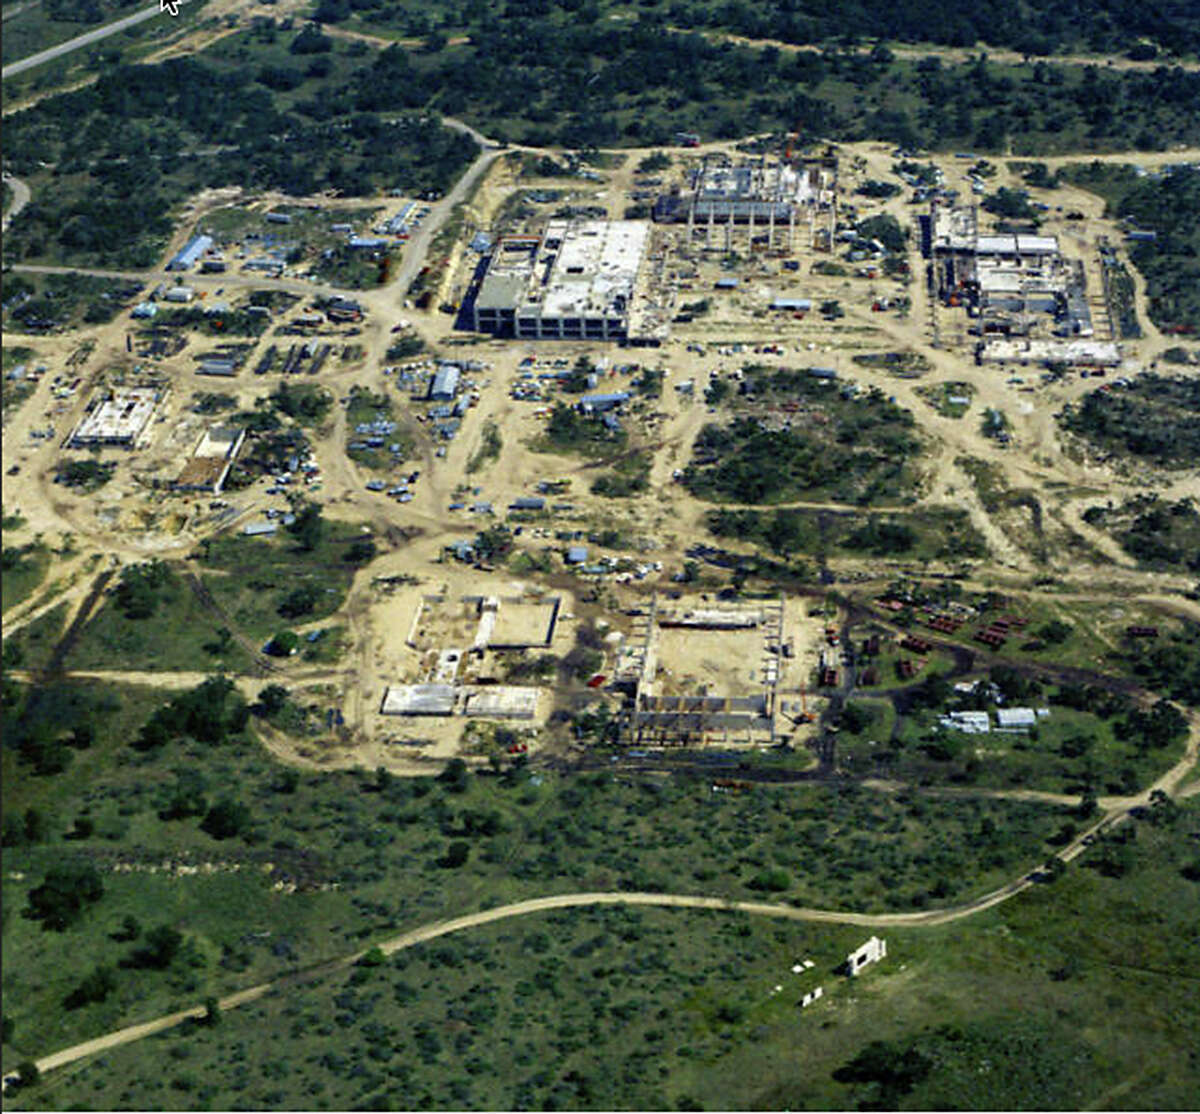 The University of Texas at San Antonio main campus has changed drastically since this aerial photo was taken 1972.